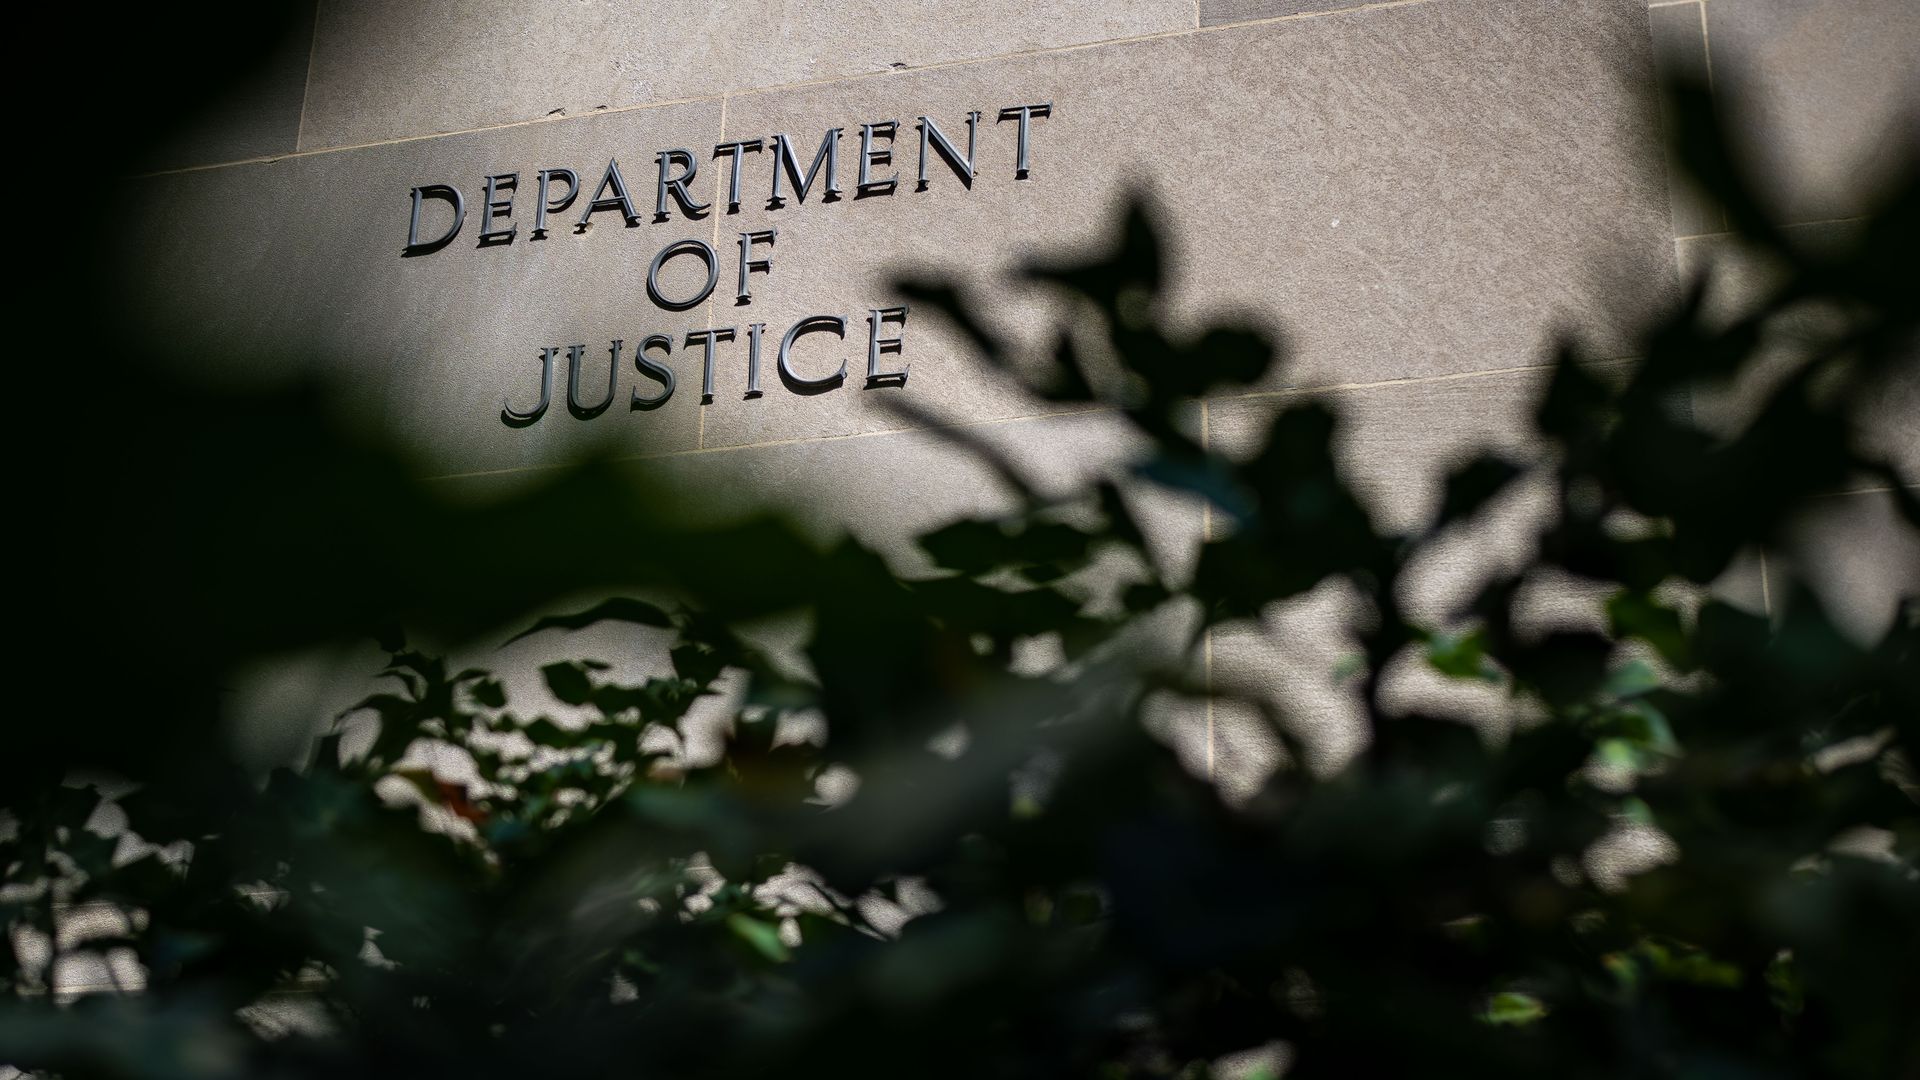  The Department of Justice (DOJ) building on Thursday, Aug. 18, 2022 in Washington, DC. Photo: Kent Nishimura / Los Angeles Times via Getty Images